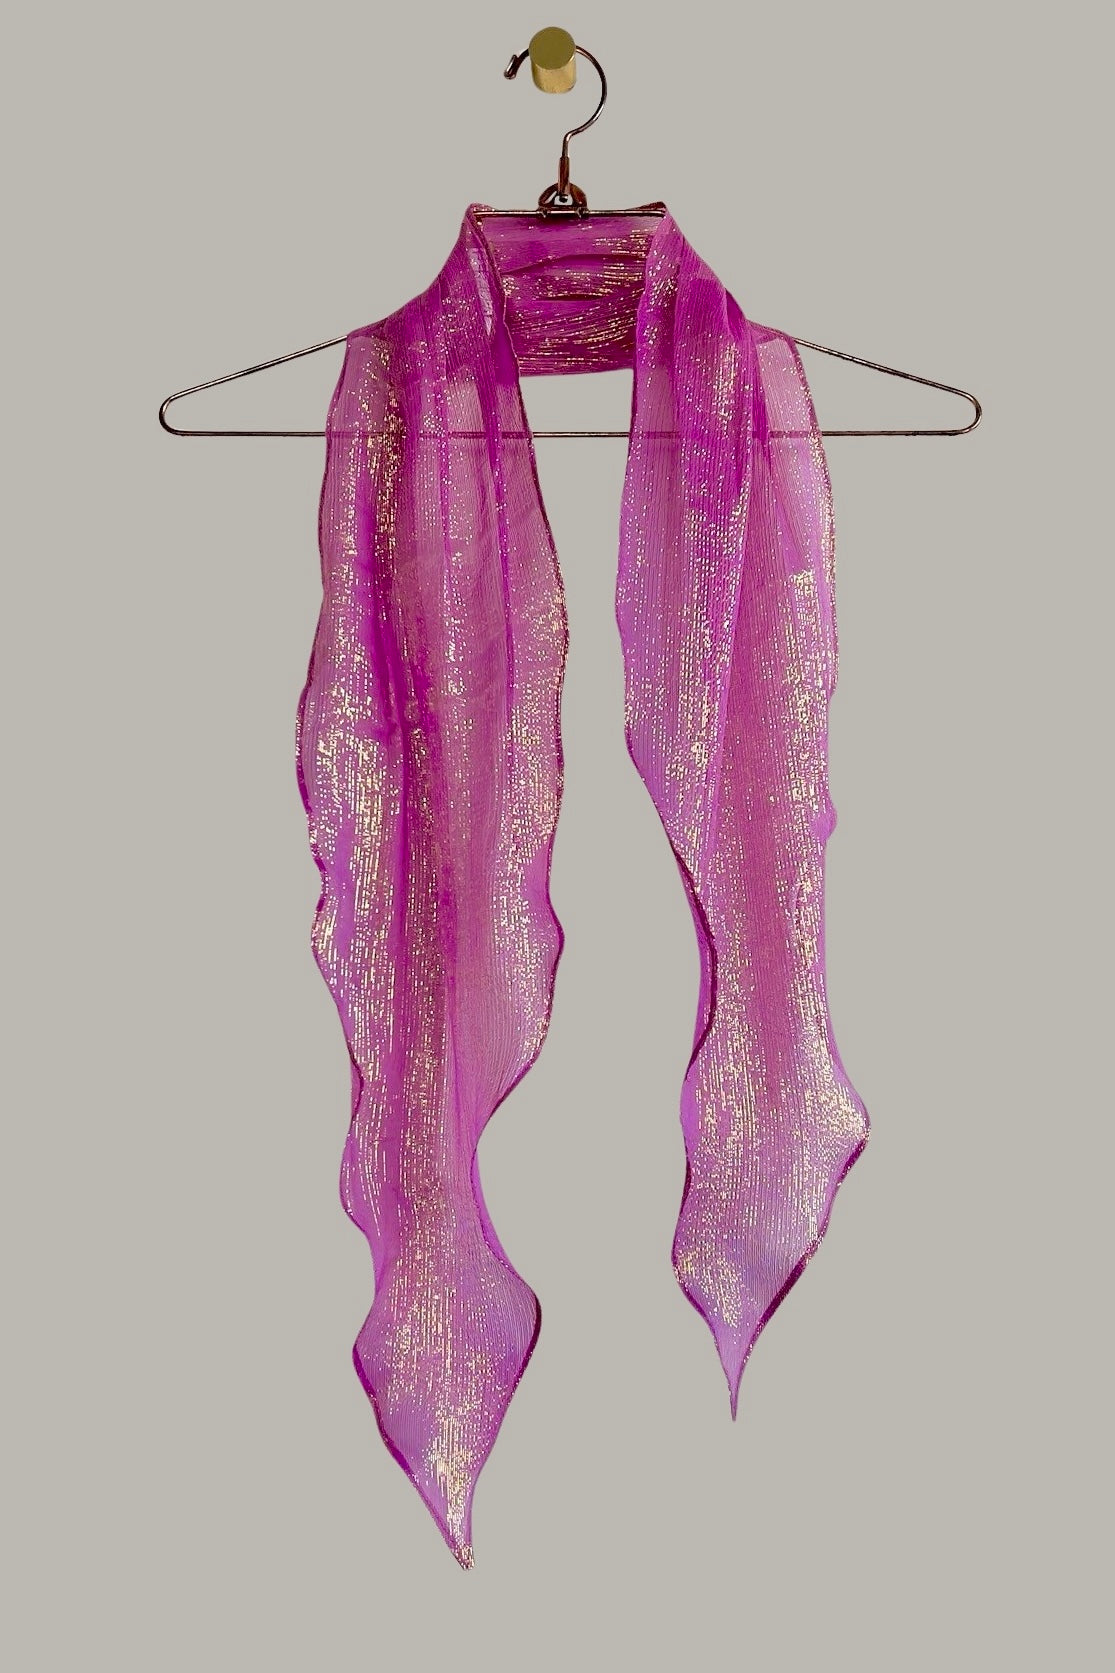 Unisex Infinite Bandeau Ascot Sash in Orchid/Gold